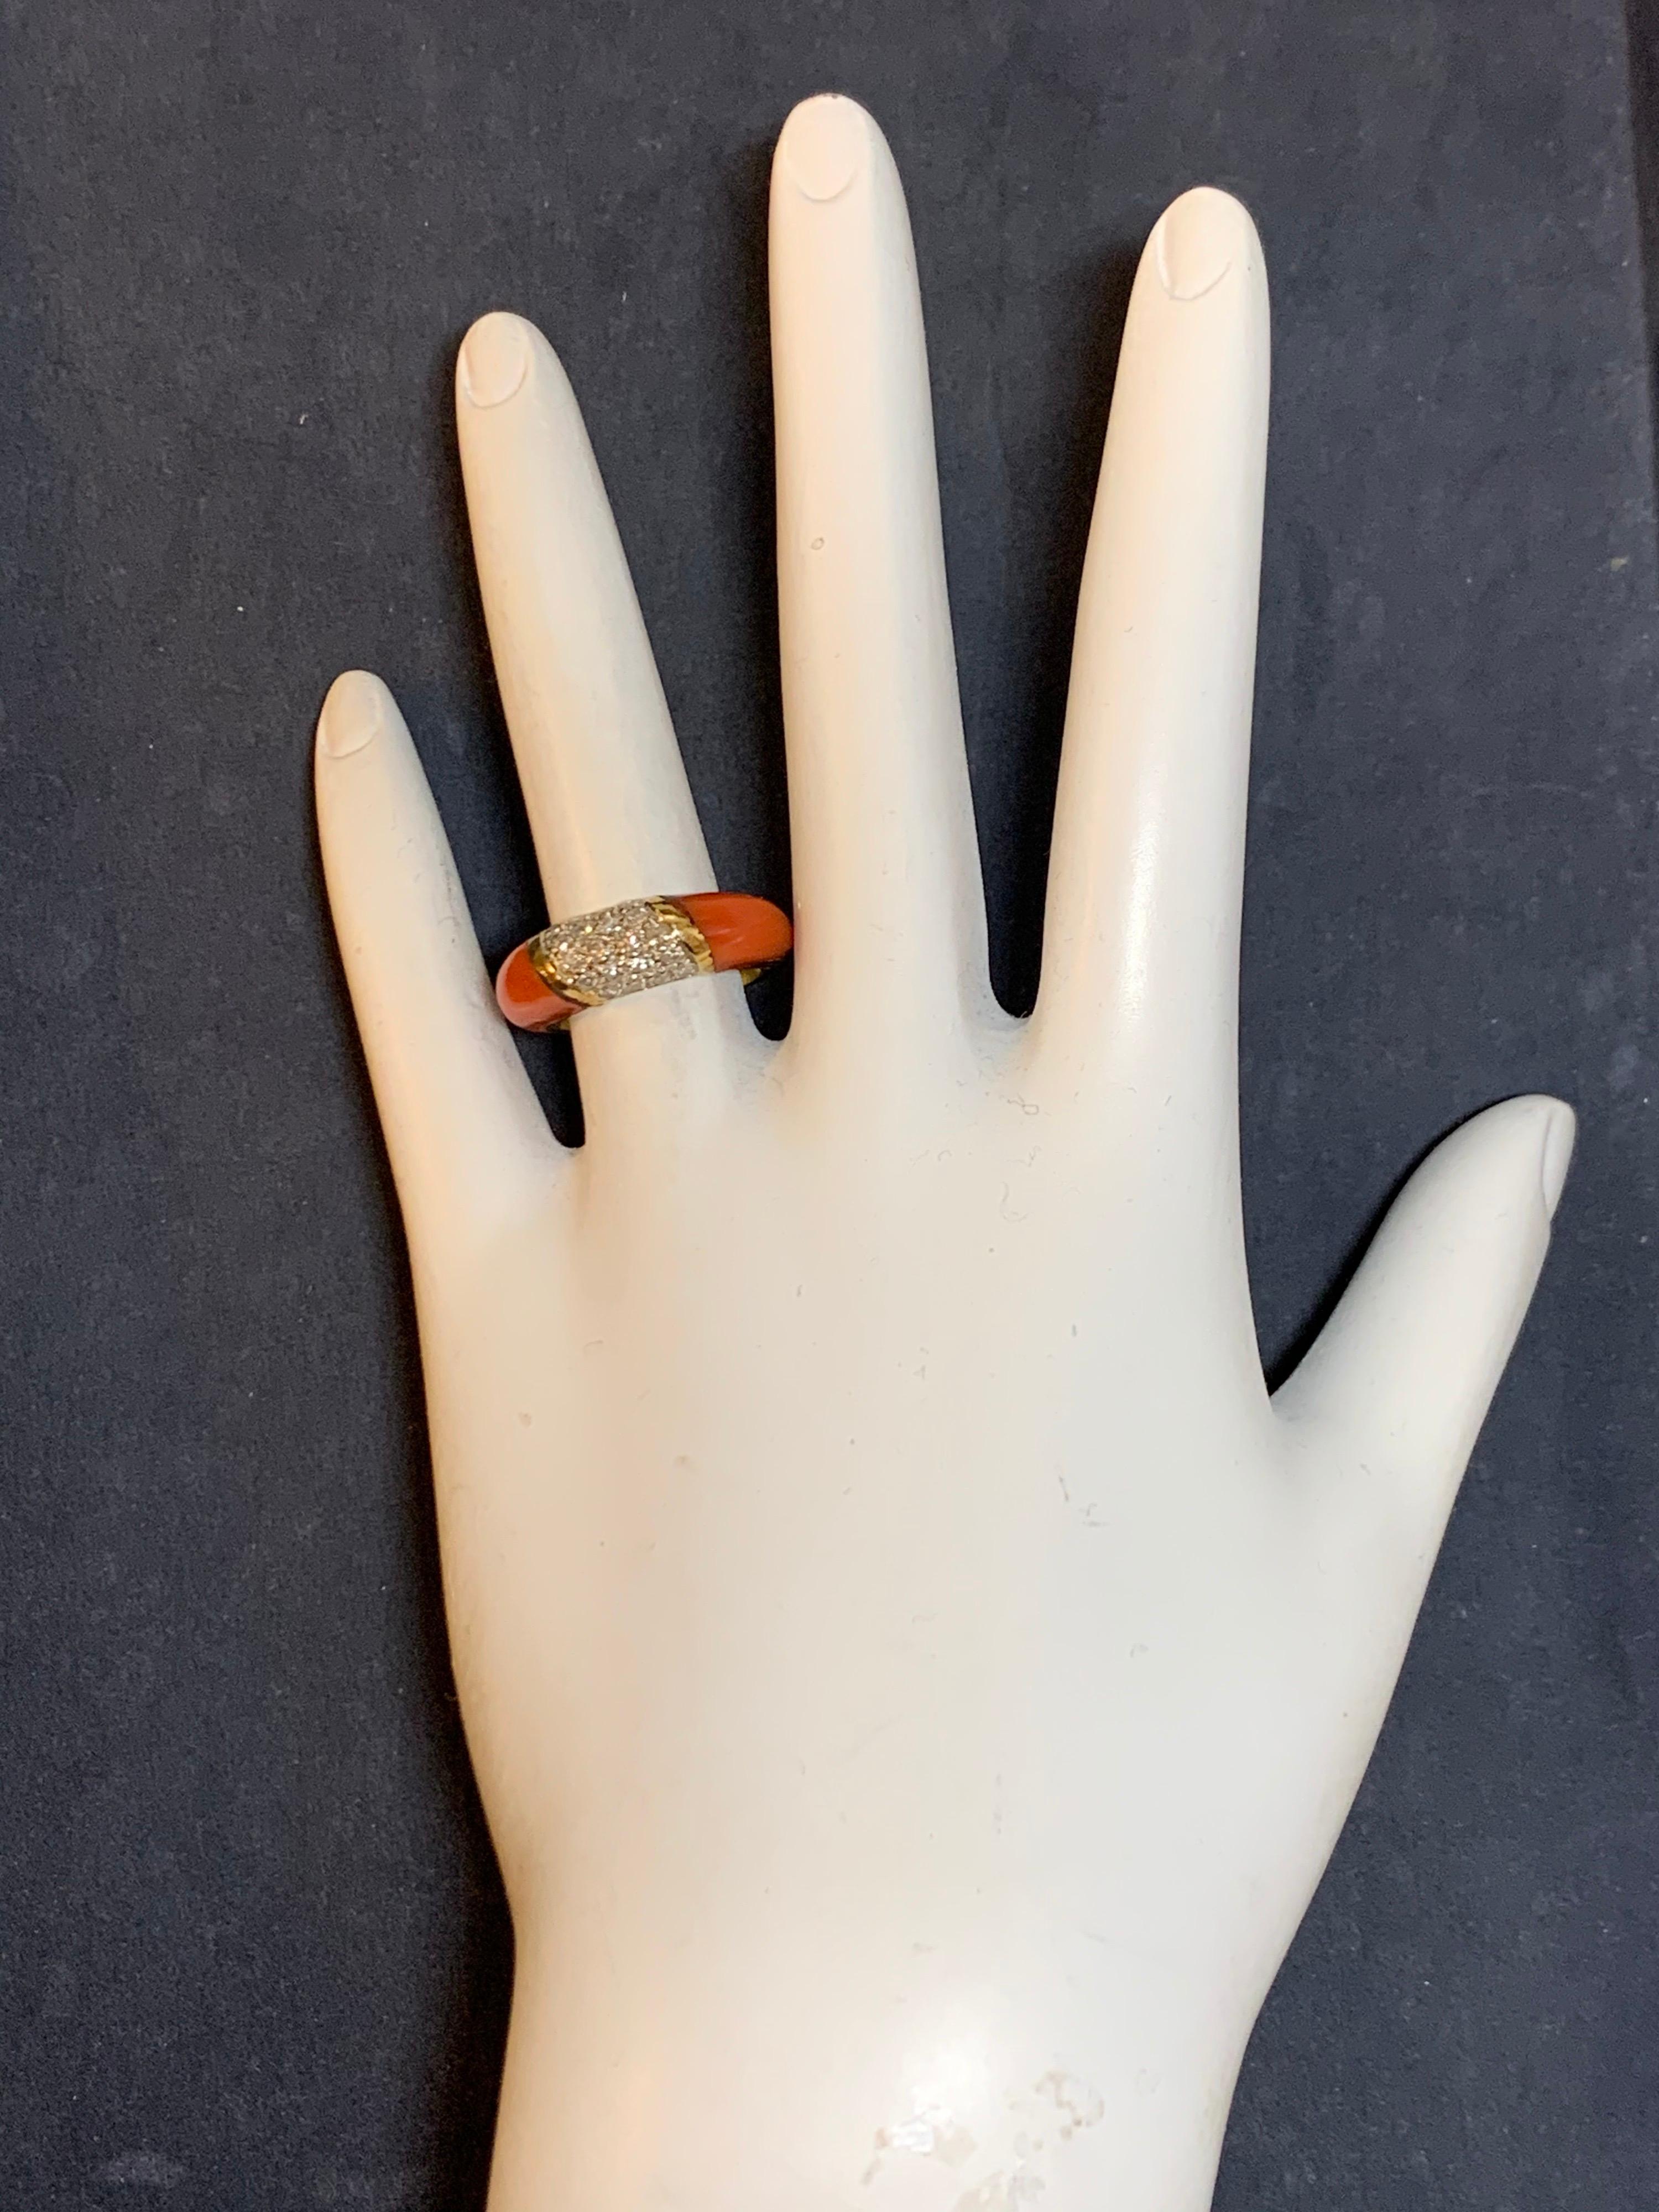 Retro 18k Yellow Gold Ring set with Natural Coral & 20 Natural Single Cut Diamonds, approximately 0.55 carats (G VS).

Ring is a size 5.25, weighs 5.5 grams, width tapers from the top 6.3mm to 2.6mm.

Circa 1950. 